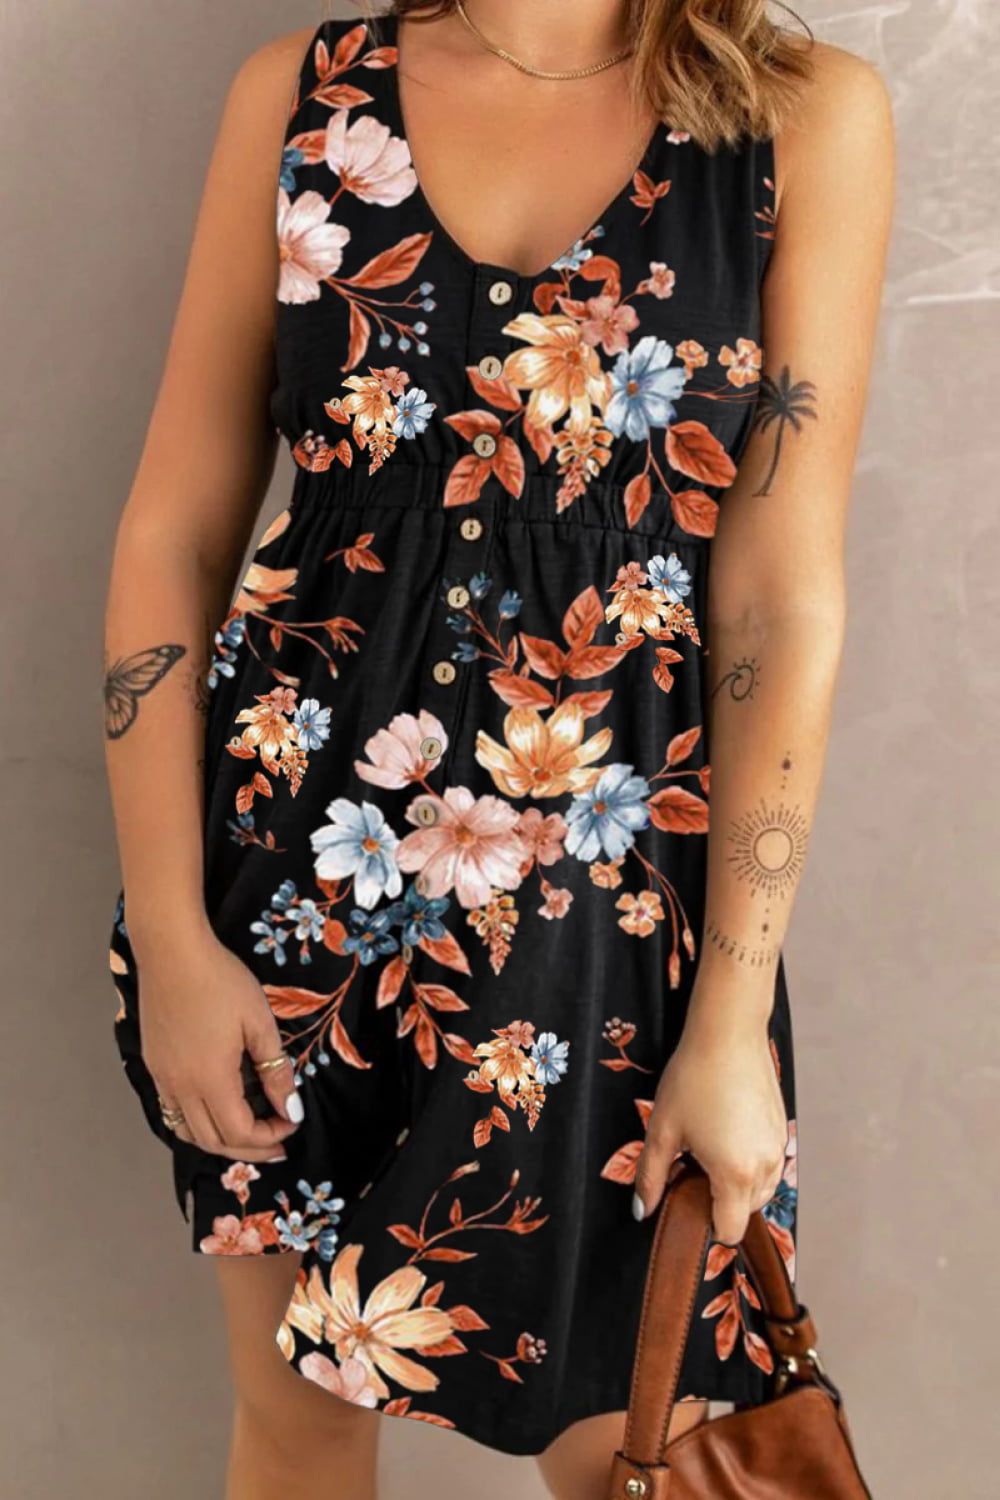 Double Take Printed Scoop Neck Sleeveless Buttoned Magic Dress with Pockets